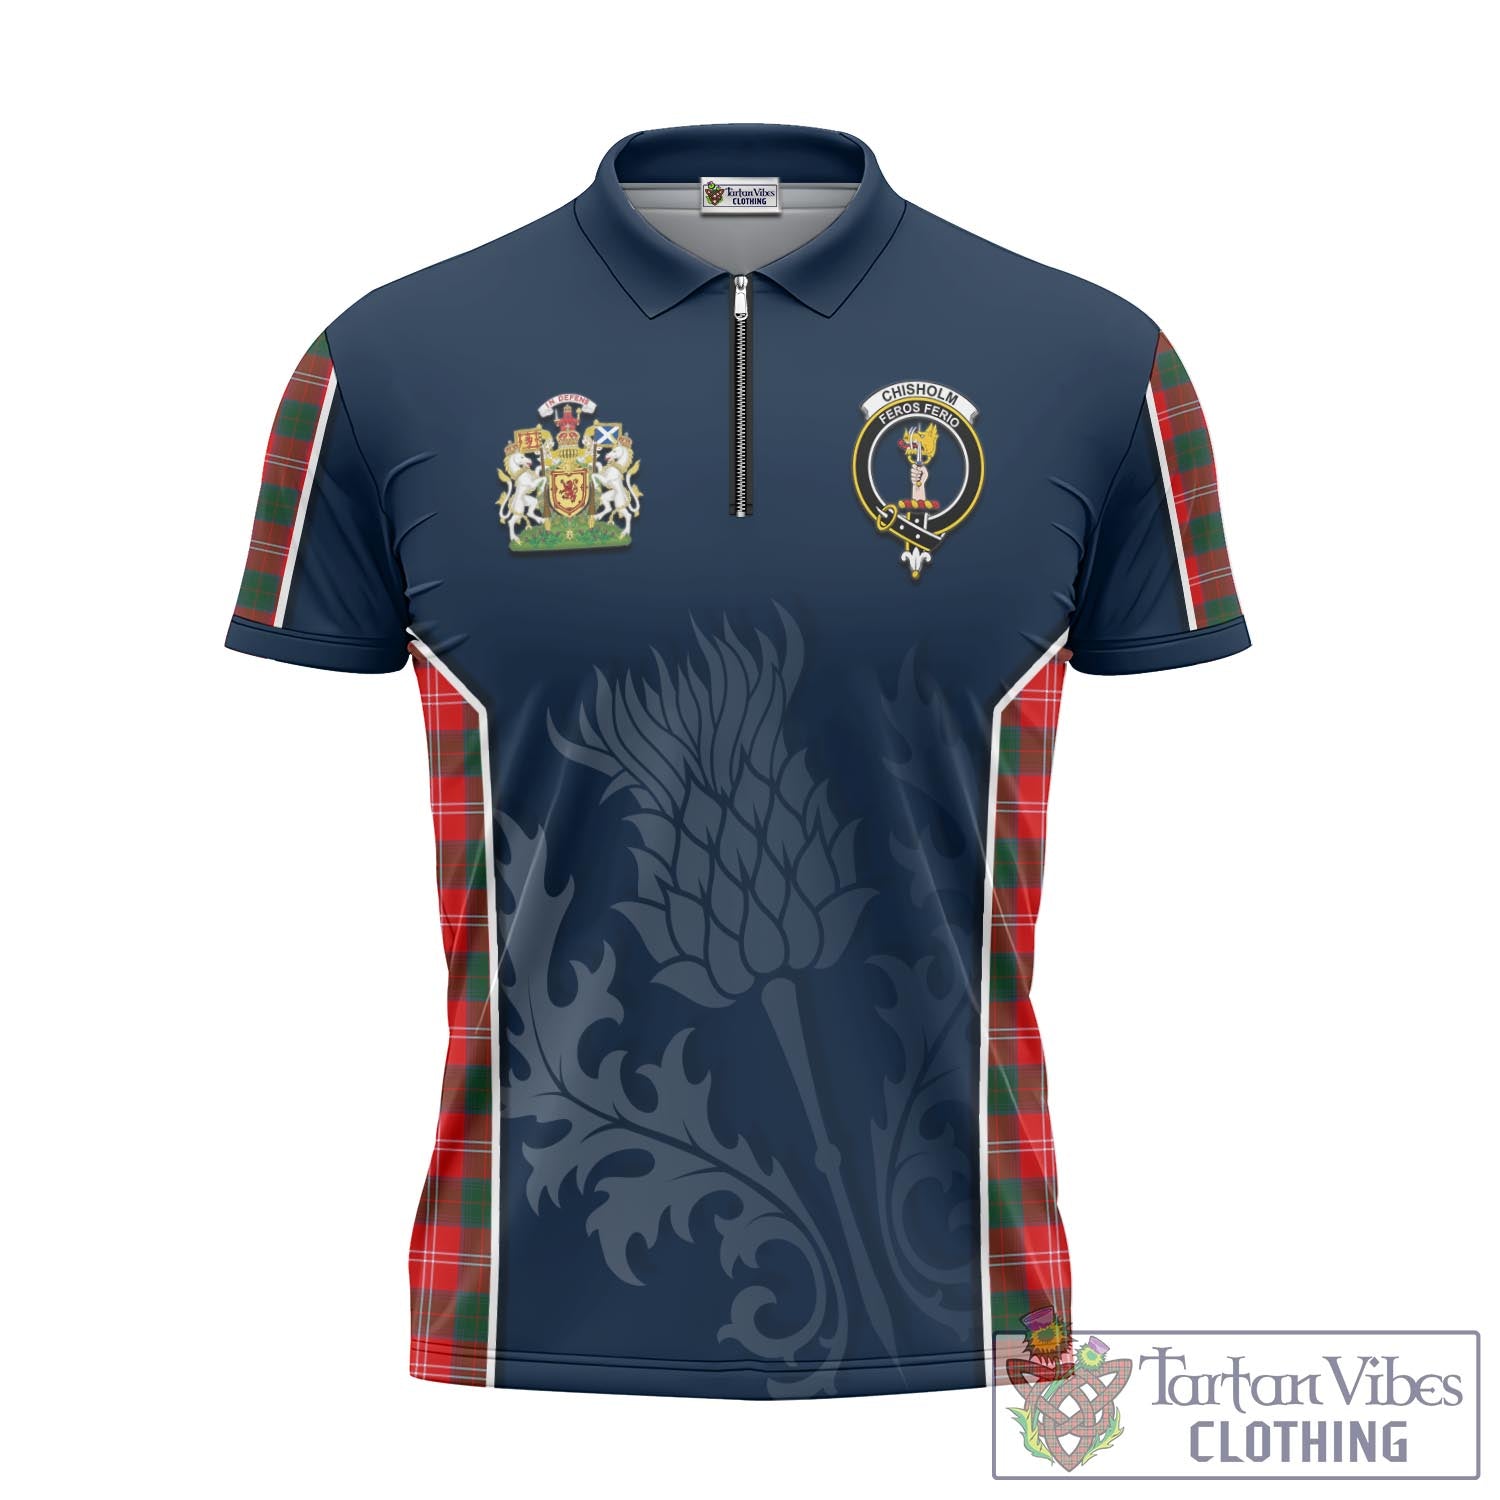 Tartan Vibes Clothing Chisholm Modern Tartan Zipper Polo Shirt with Family Crest and Scottish Thistle Vibes Sport Style